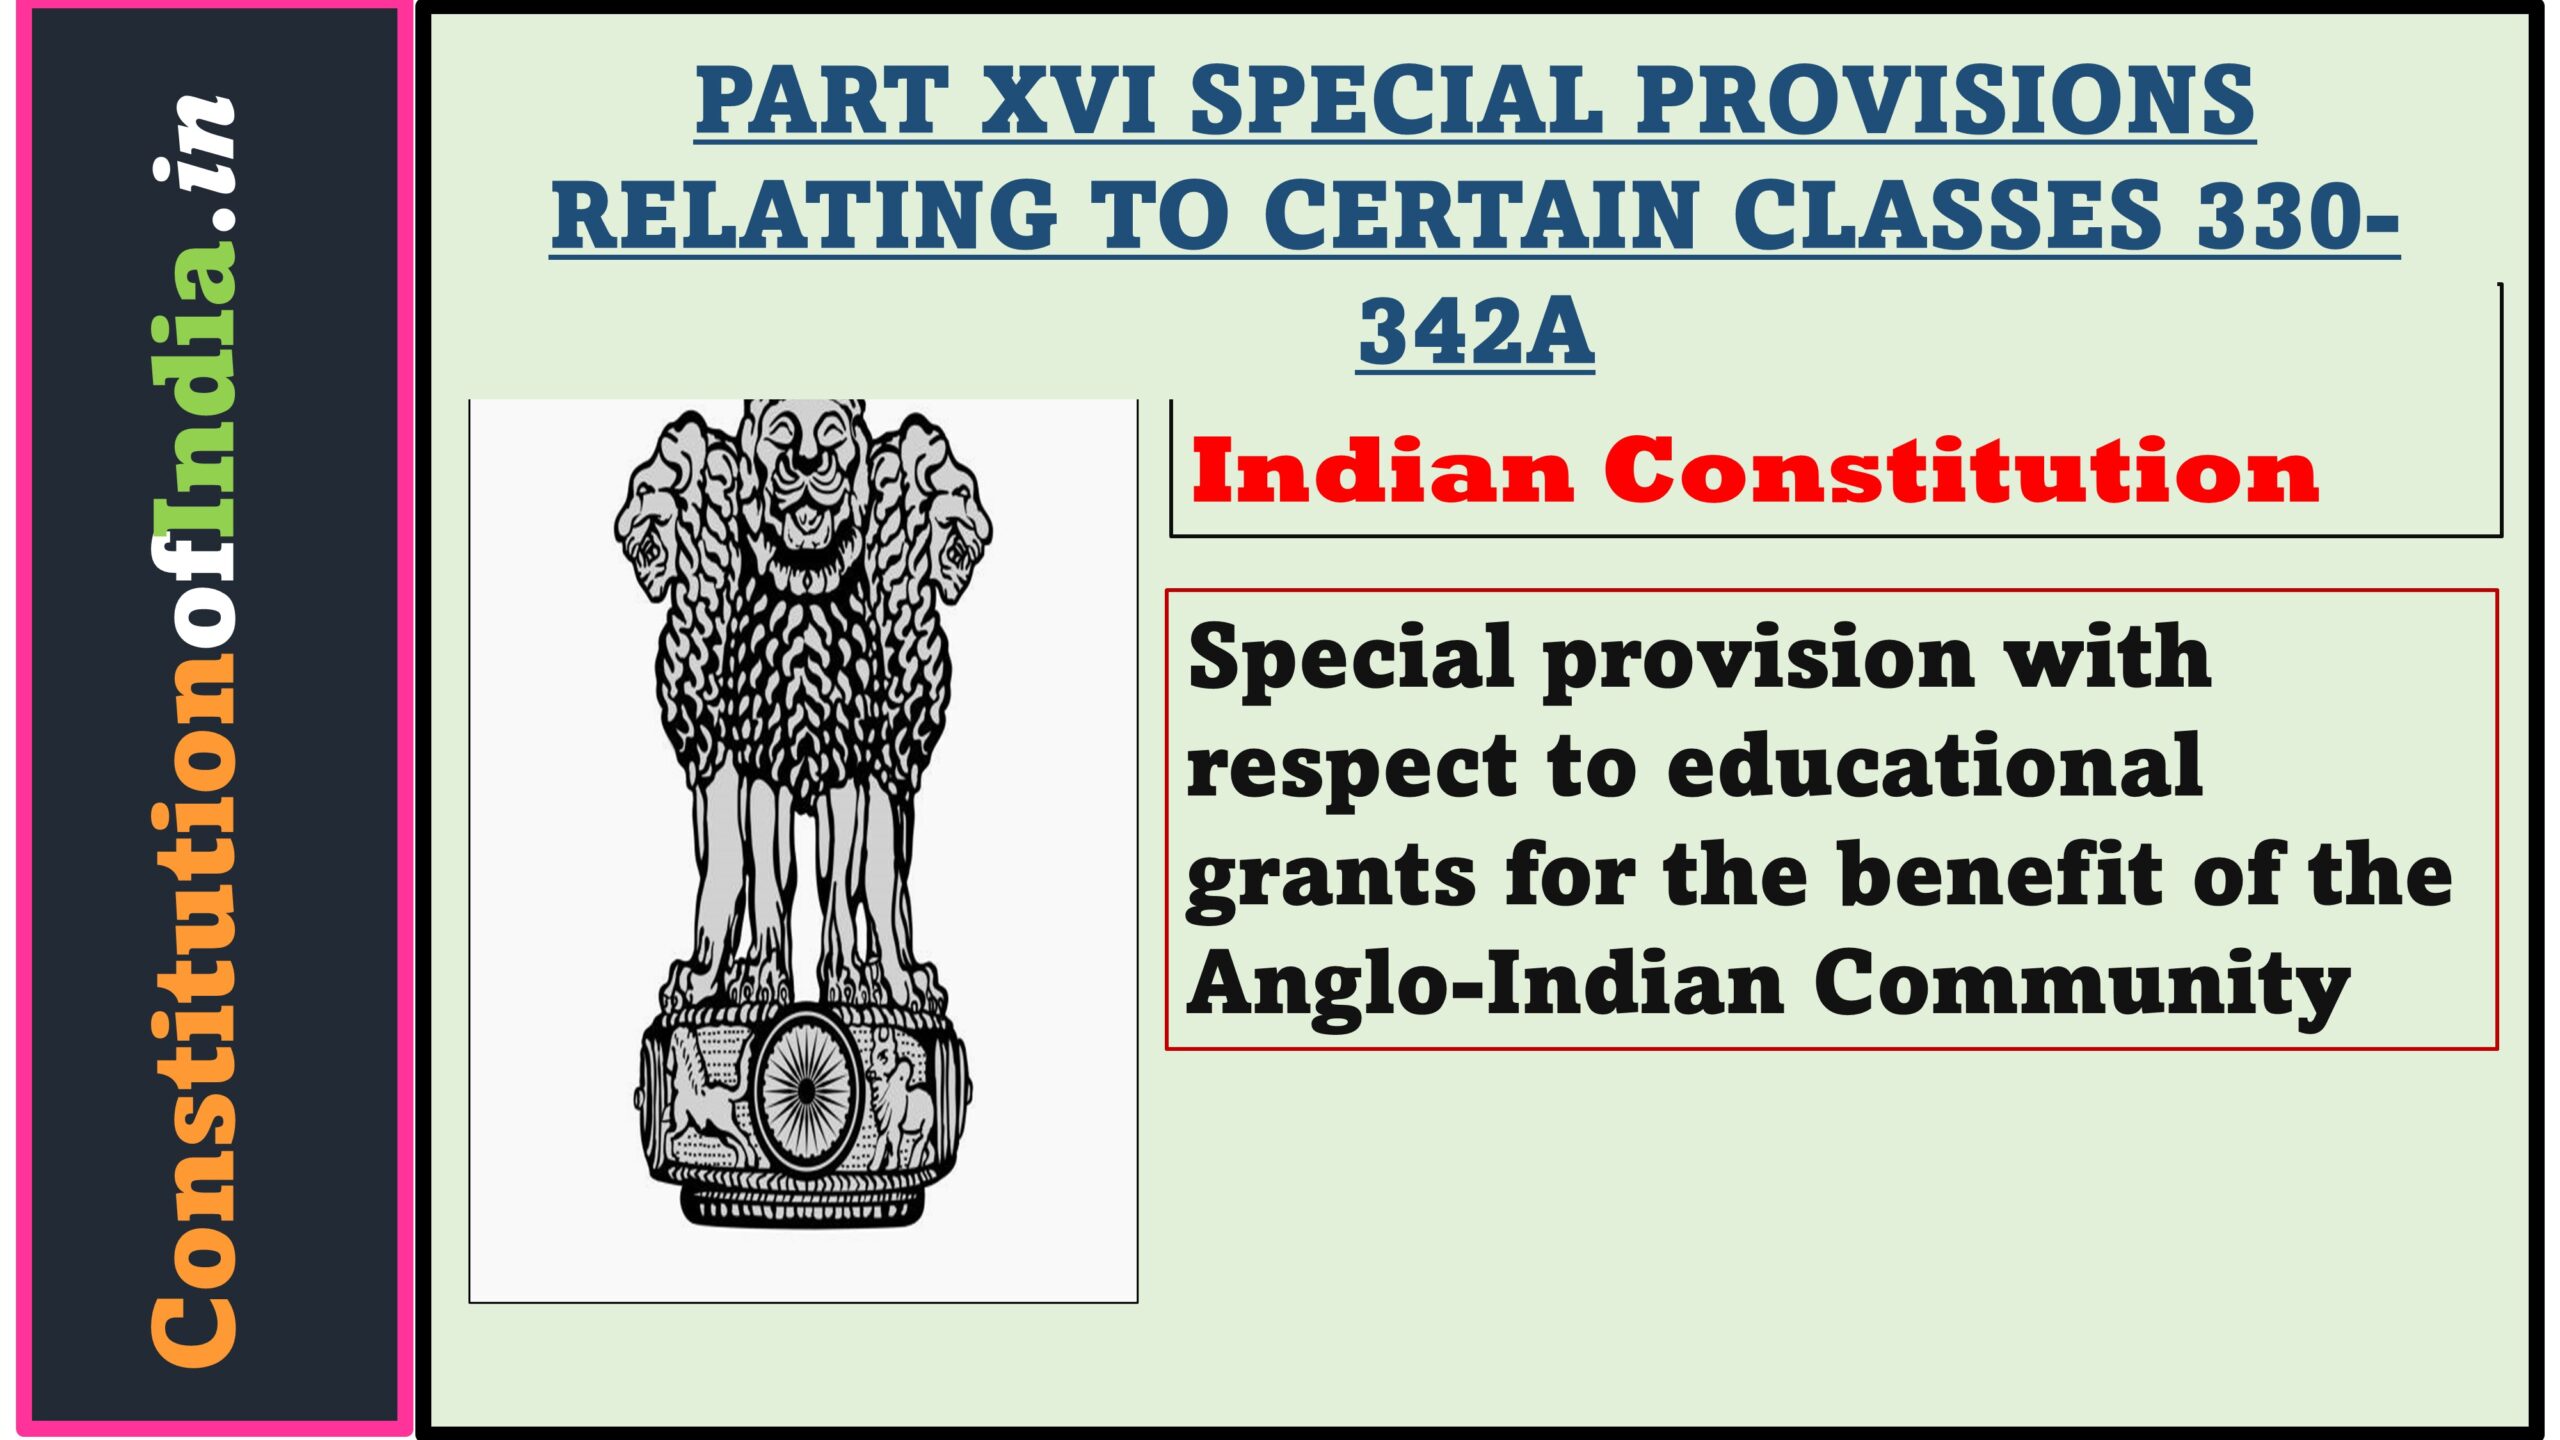 Article 337 of The Indian Constitution